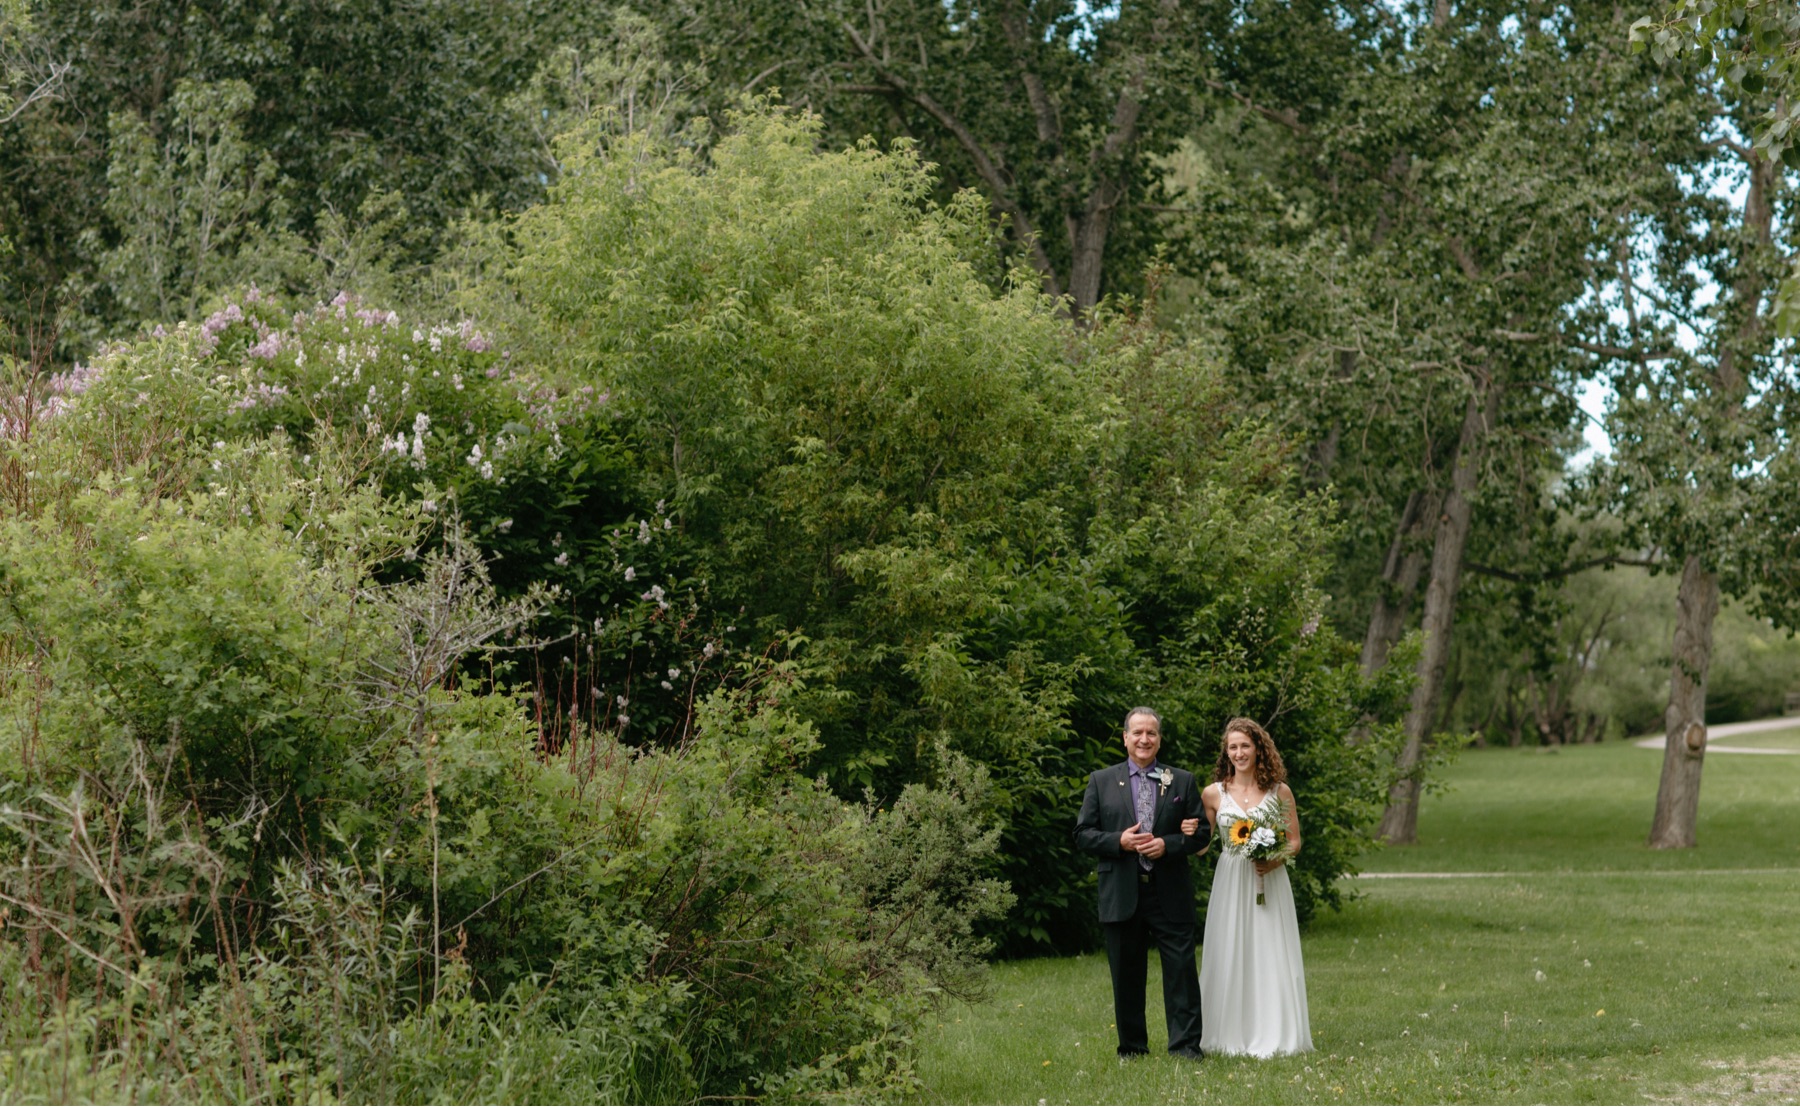 Bride and her father waiting in a secluded part of Confederation Park for the ceremony